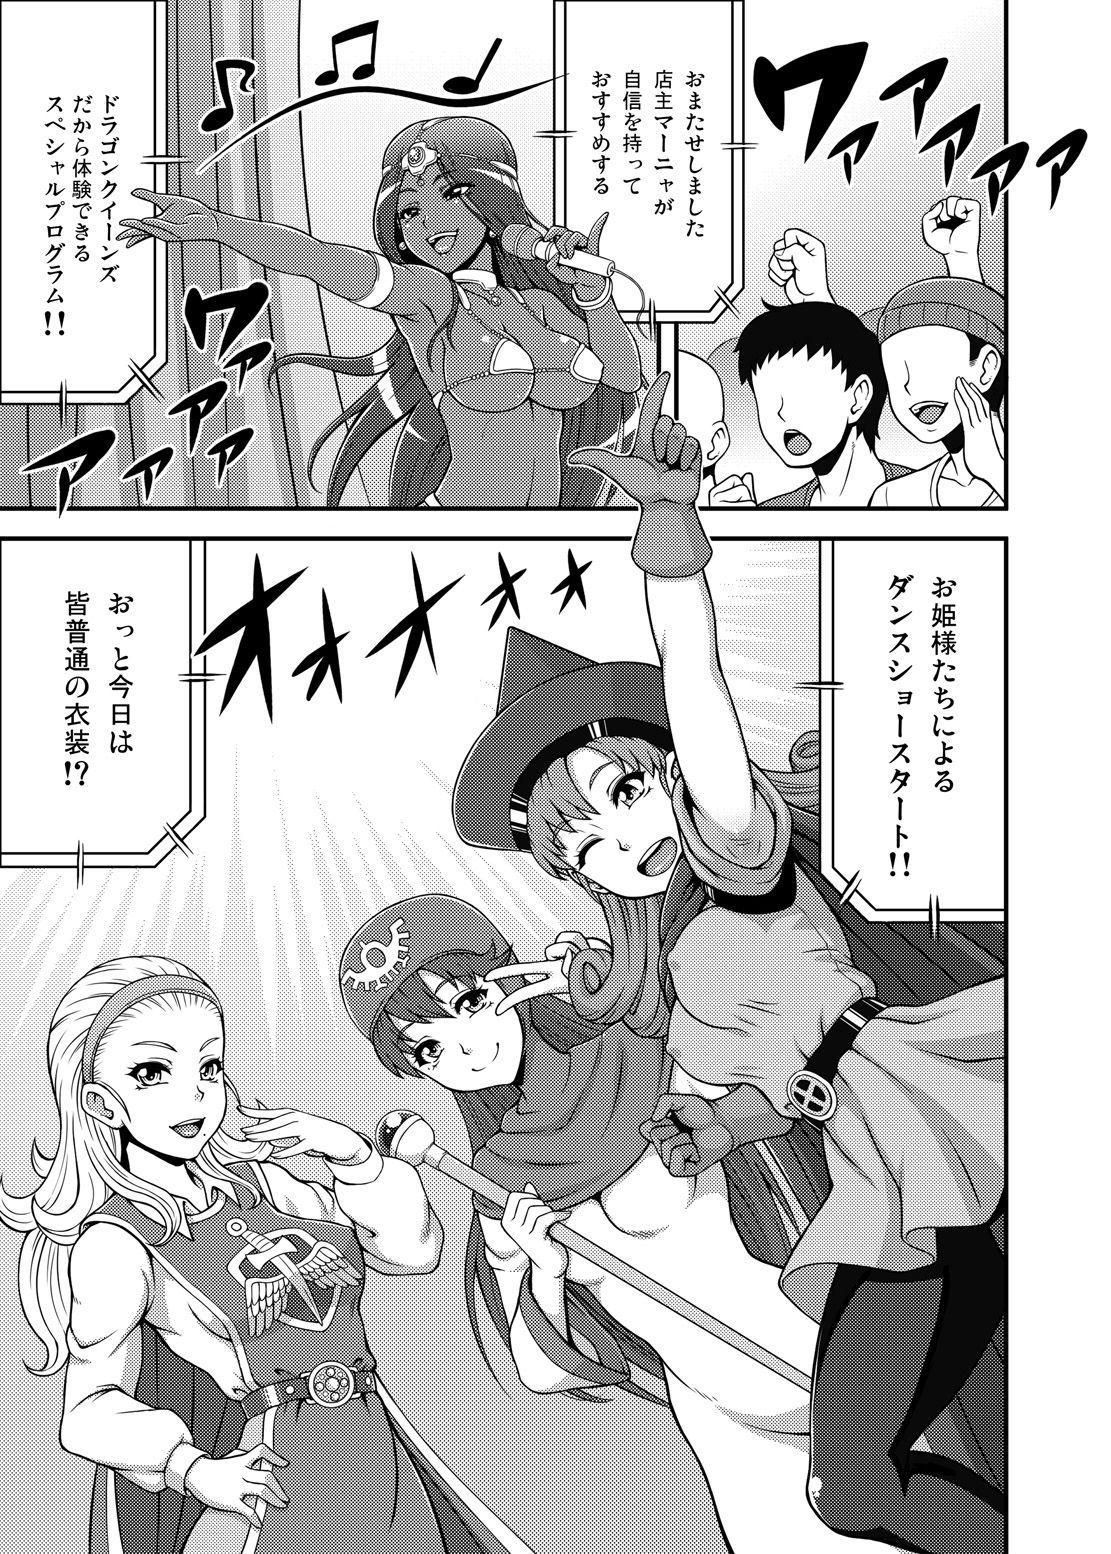 Caught Dragon Queen's 5 - King of fighters Dragon quest Glory Hole - Page 3